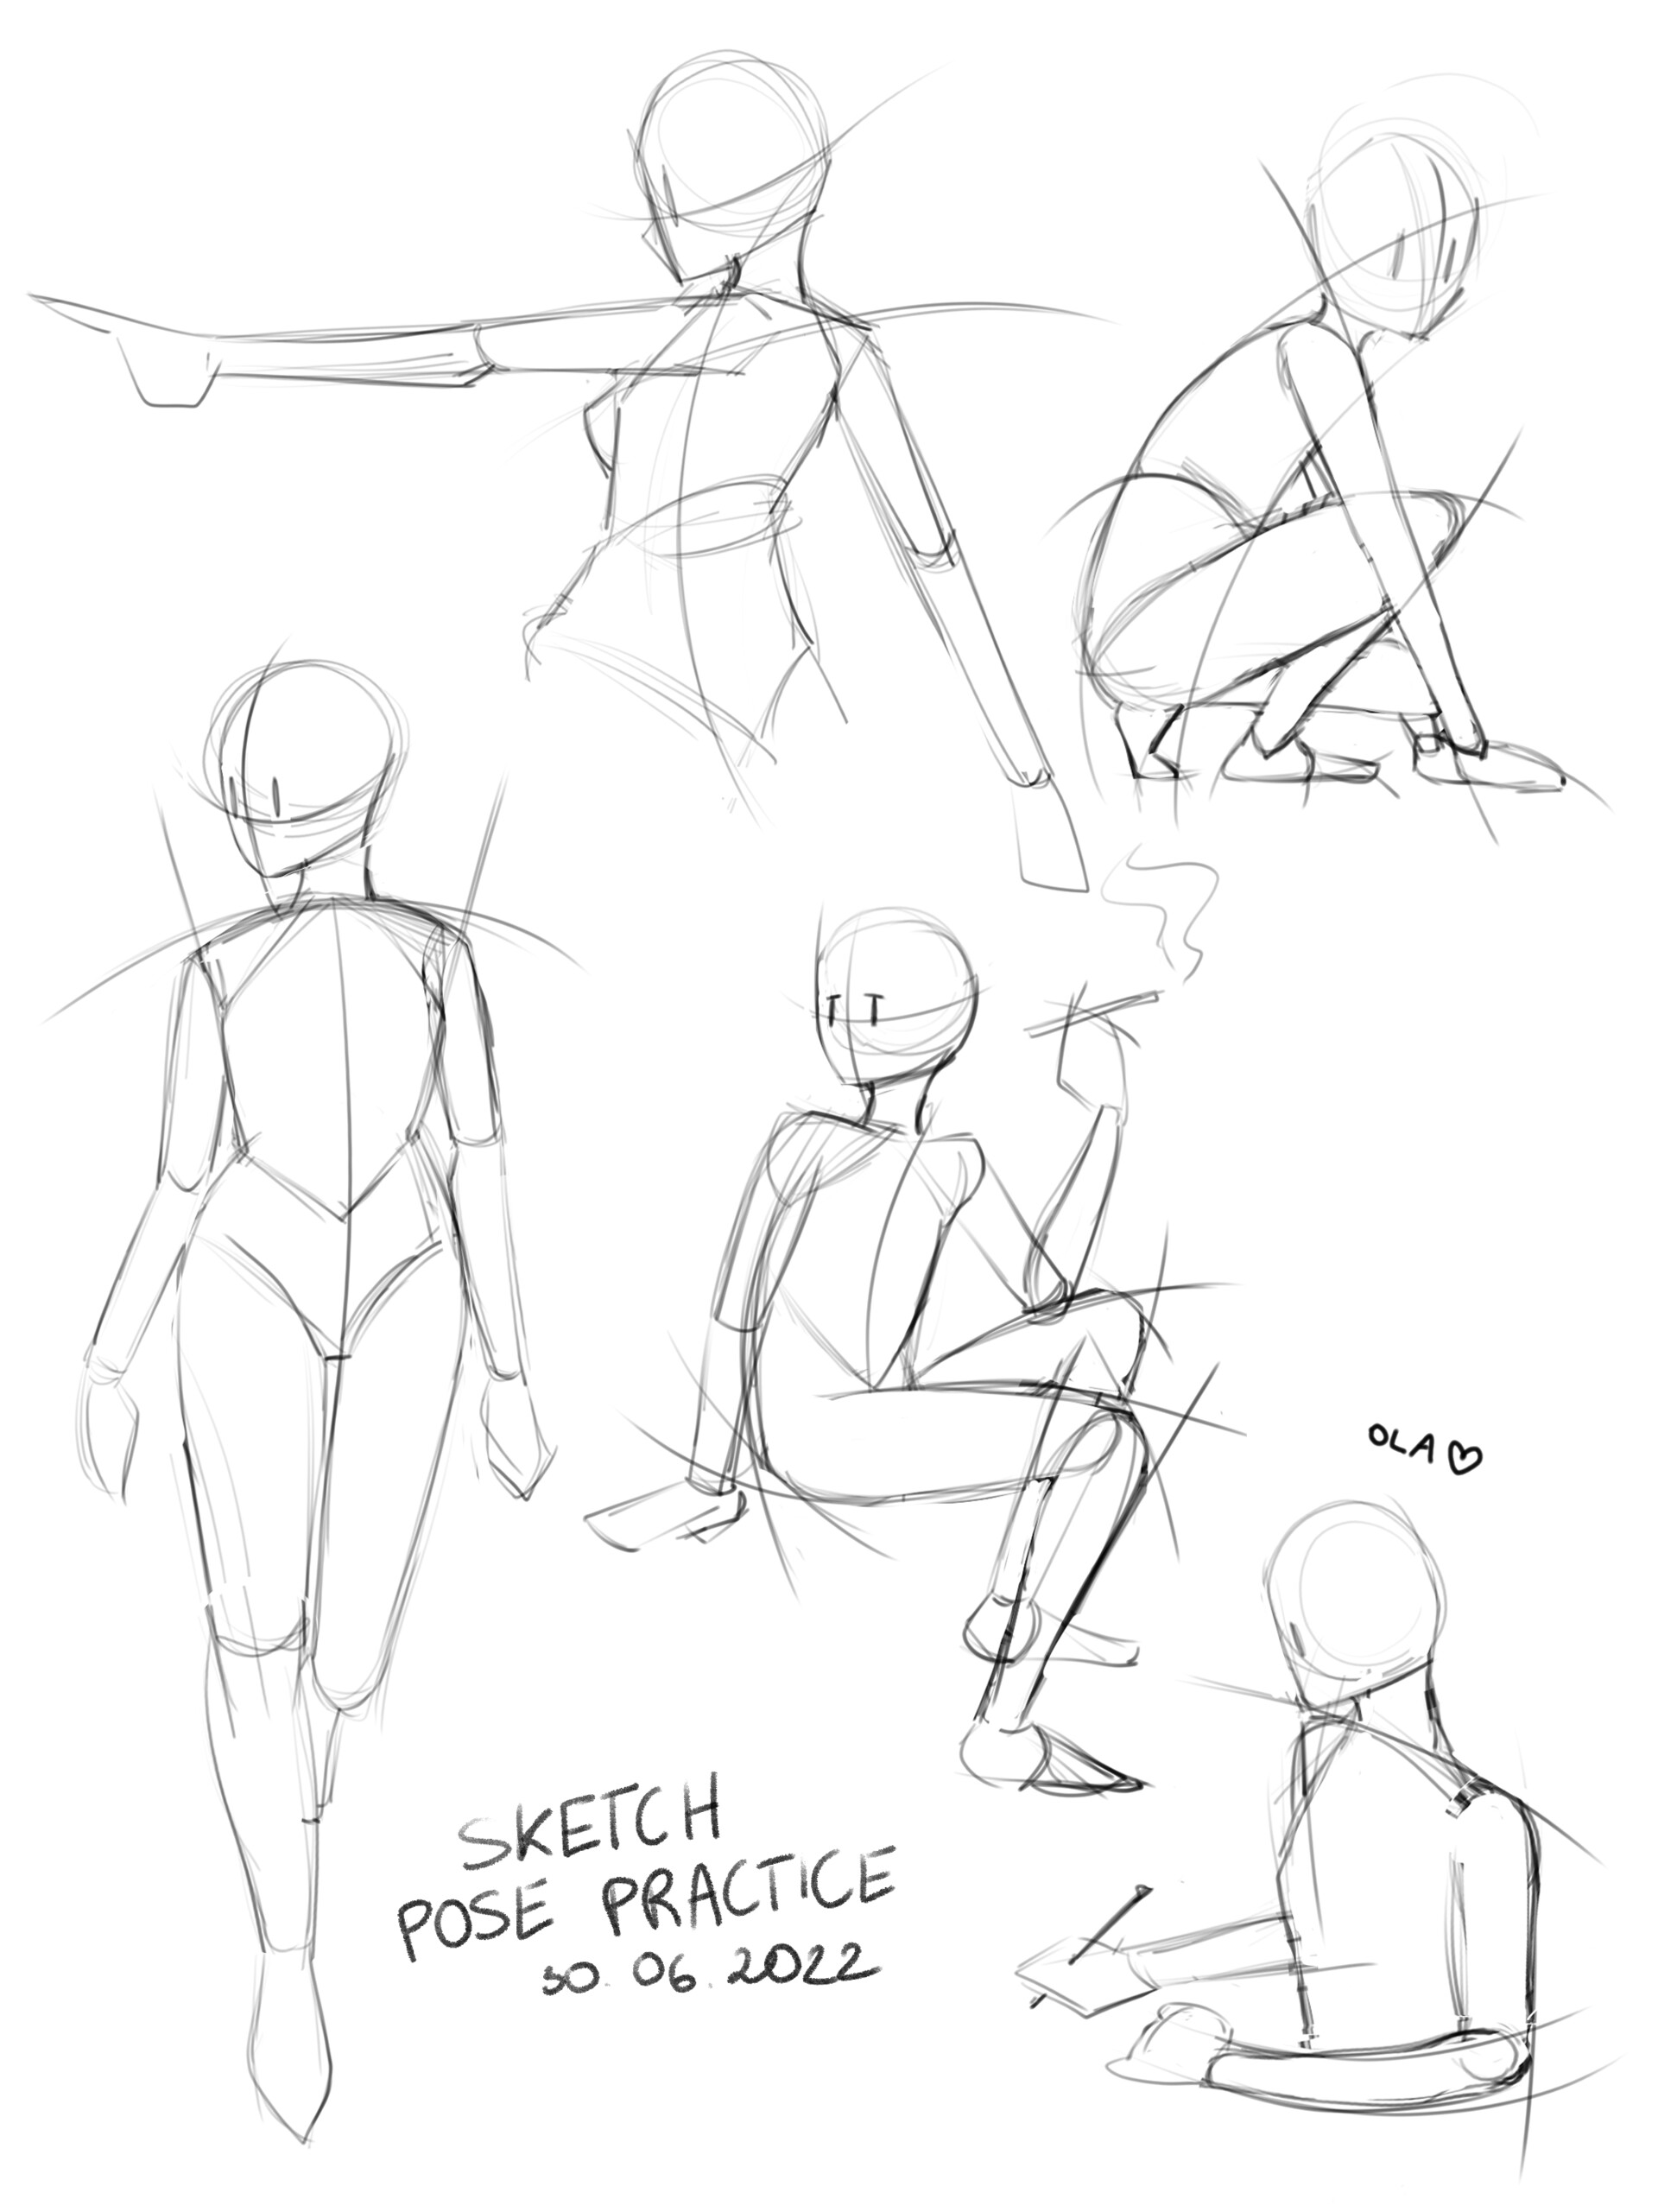 A few original poses for drawing warmups— feel free to use as references,  no permission needed! 💕 . . . #sketch #posereference #refe... | Instagram